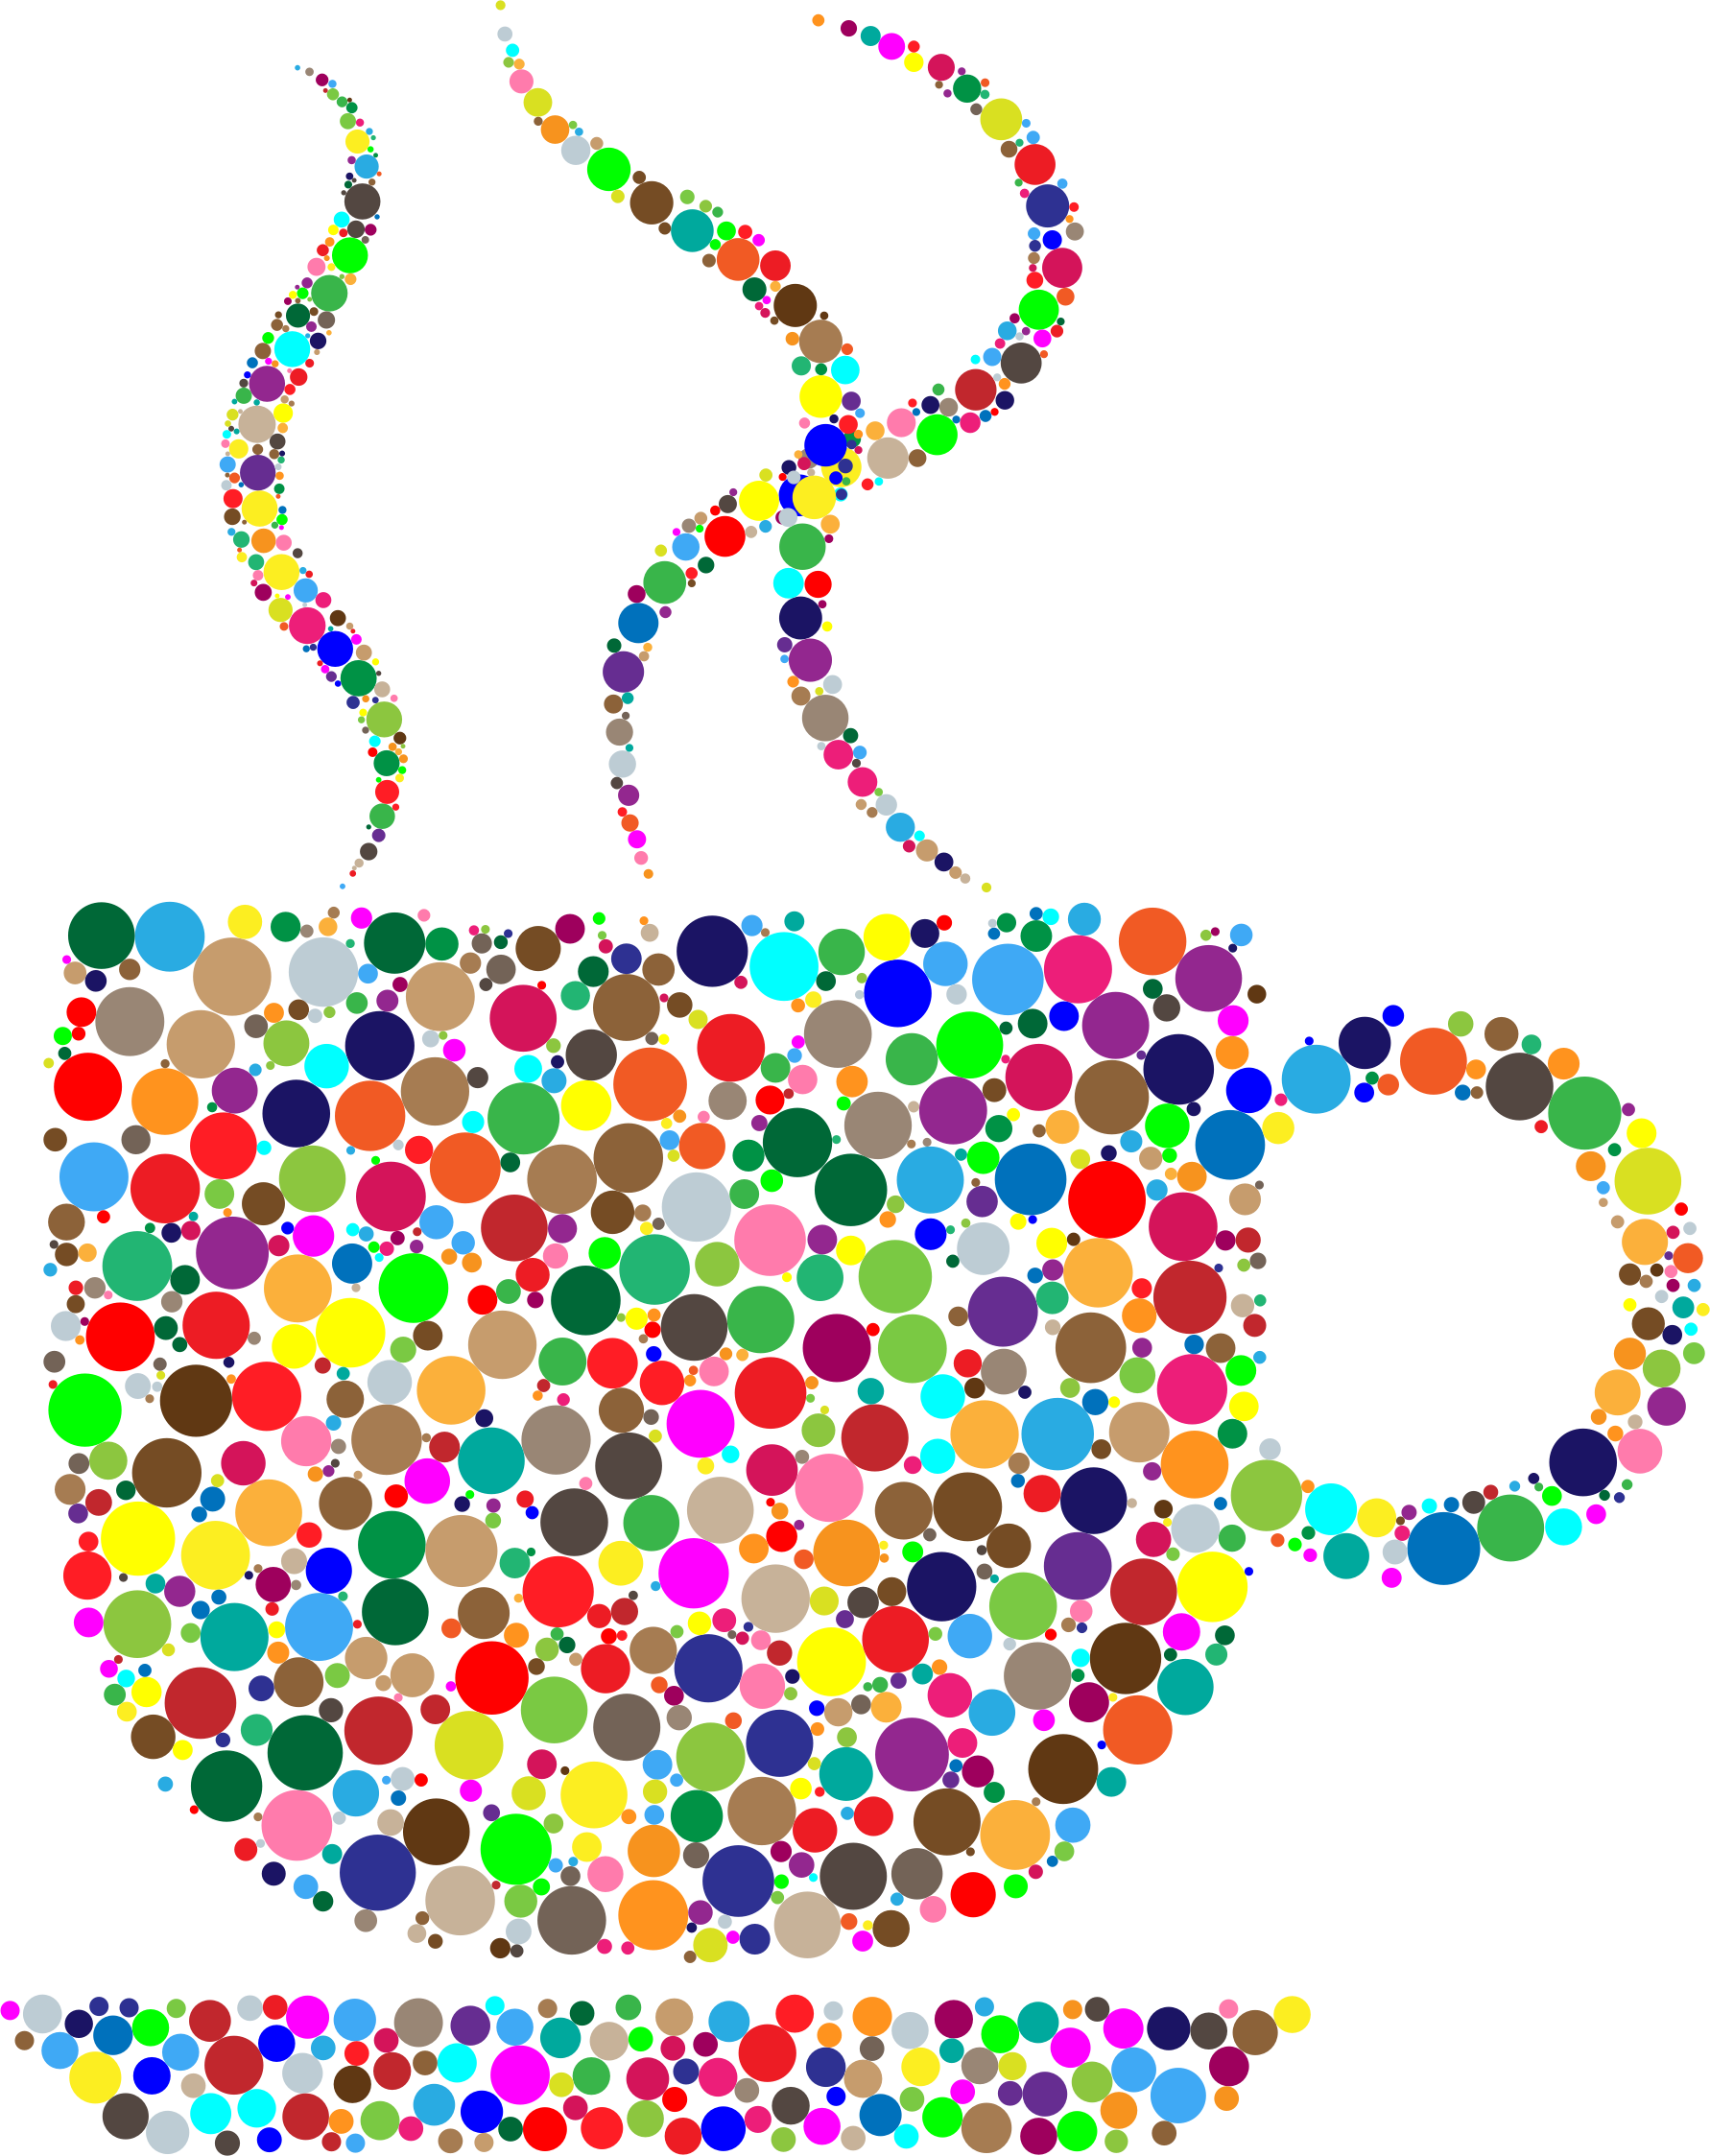 Coffee circles big image. Clipart cup colorful